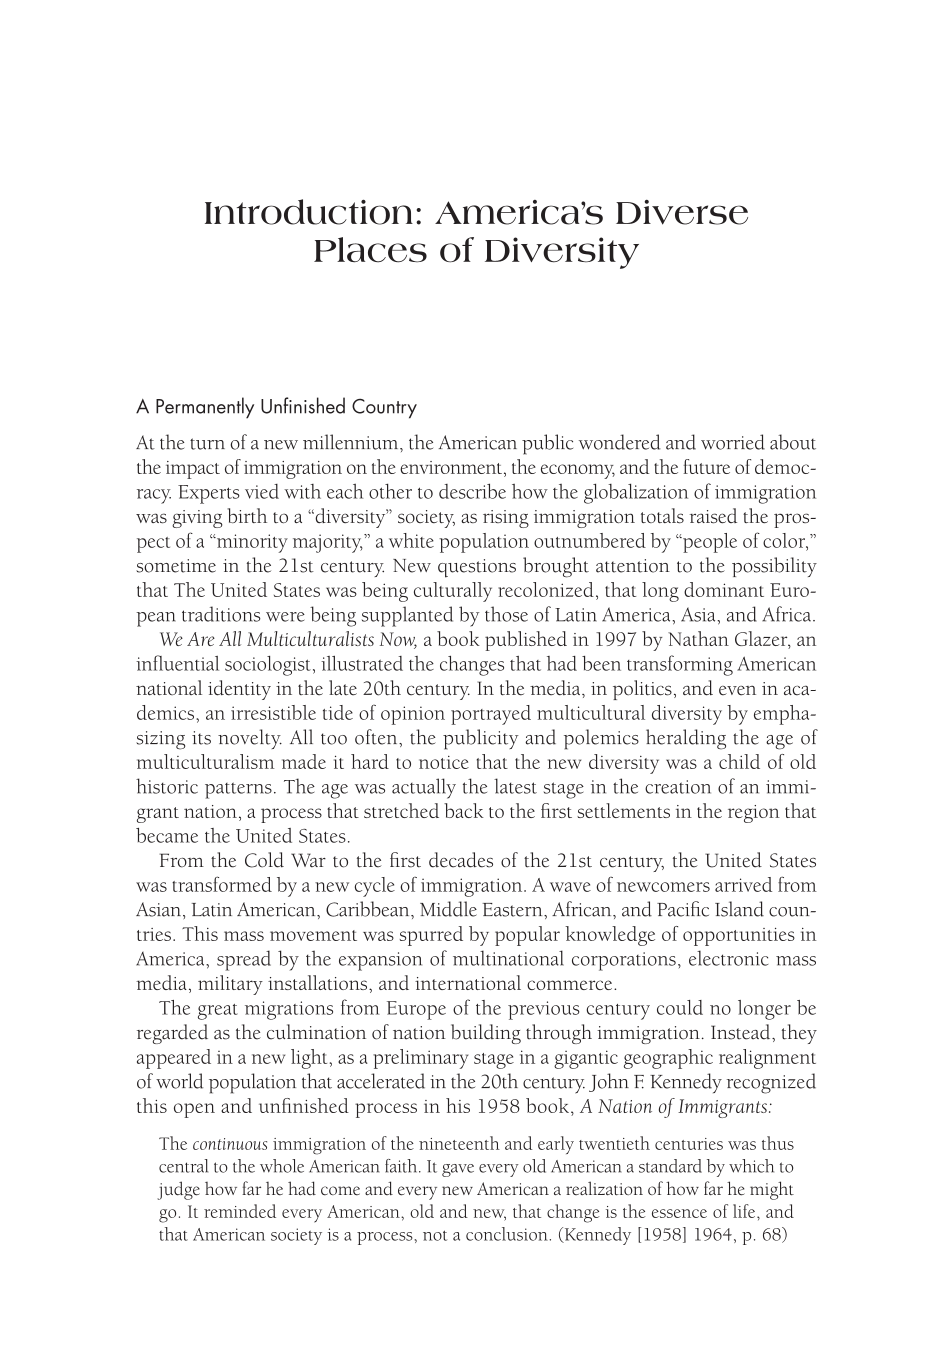 America's Changing Neighborhoods: An Exploration of Diversity through Places [3 volumes] page 1